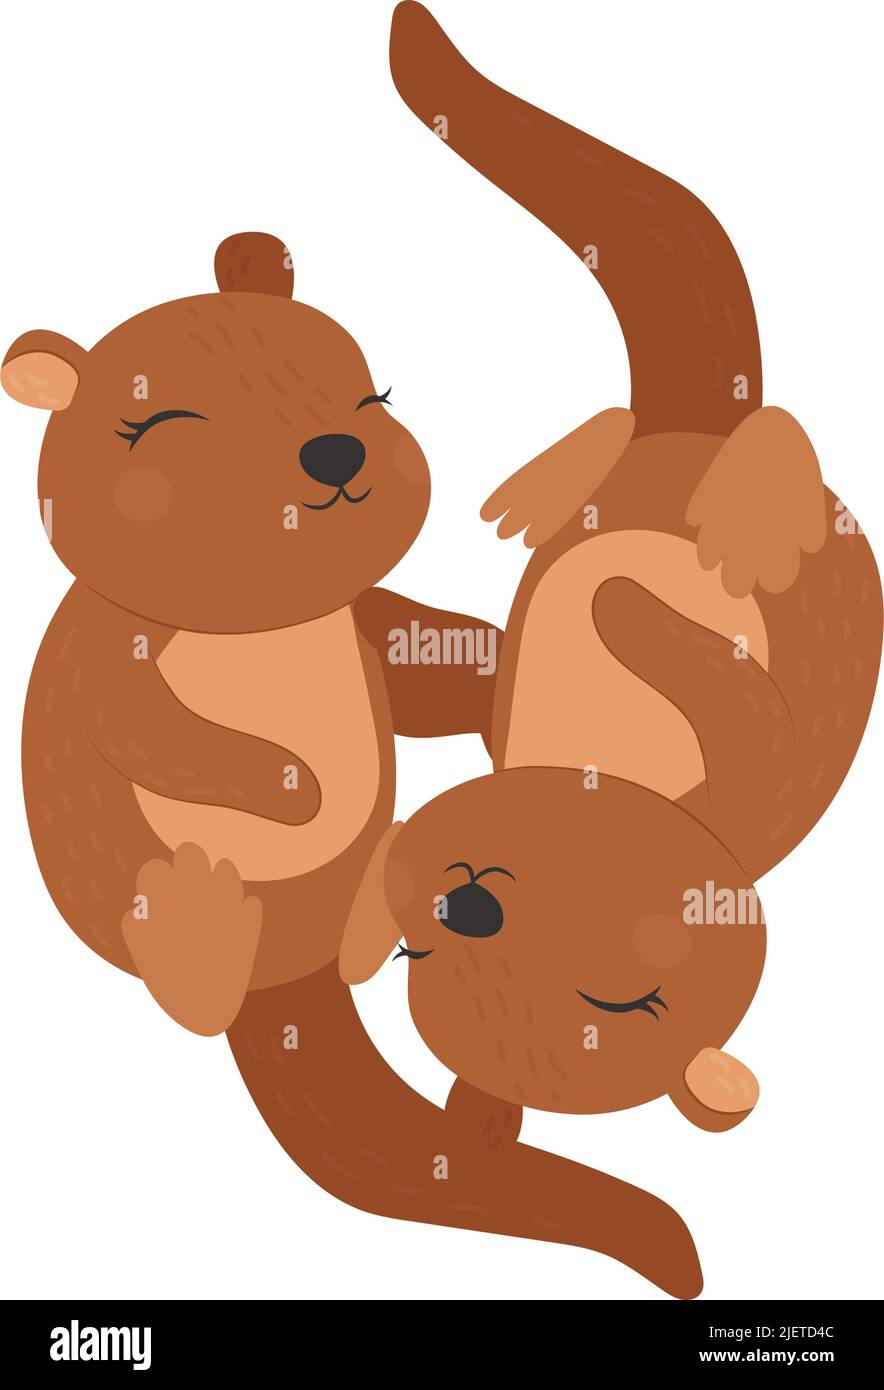 Cute Clipart Otter Illustration in Cartoon Style. Cartoon Clip Art Two Otters in Love. Vector Illustration of an Animal for Stickers, Baby Shower Stock Vector